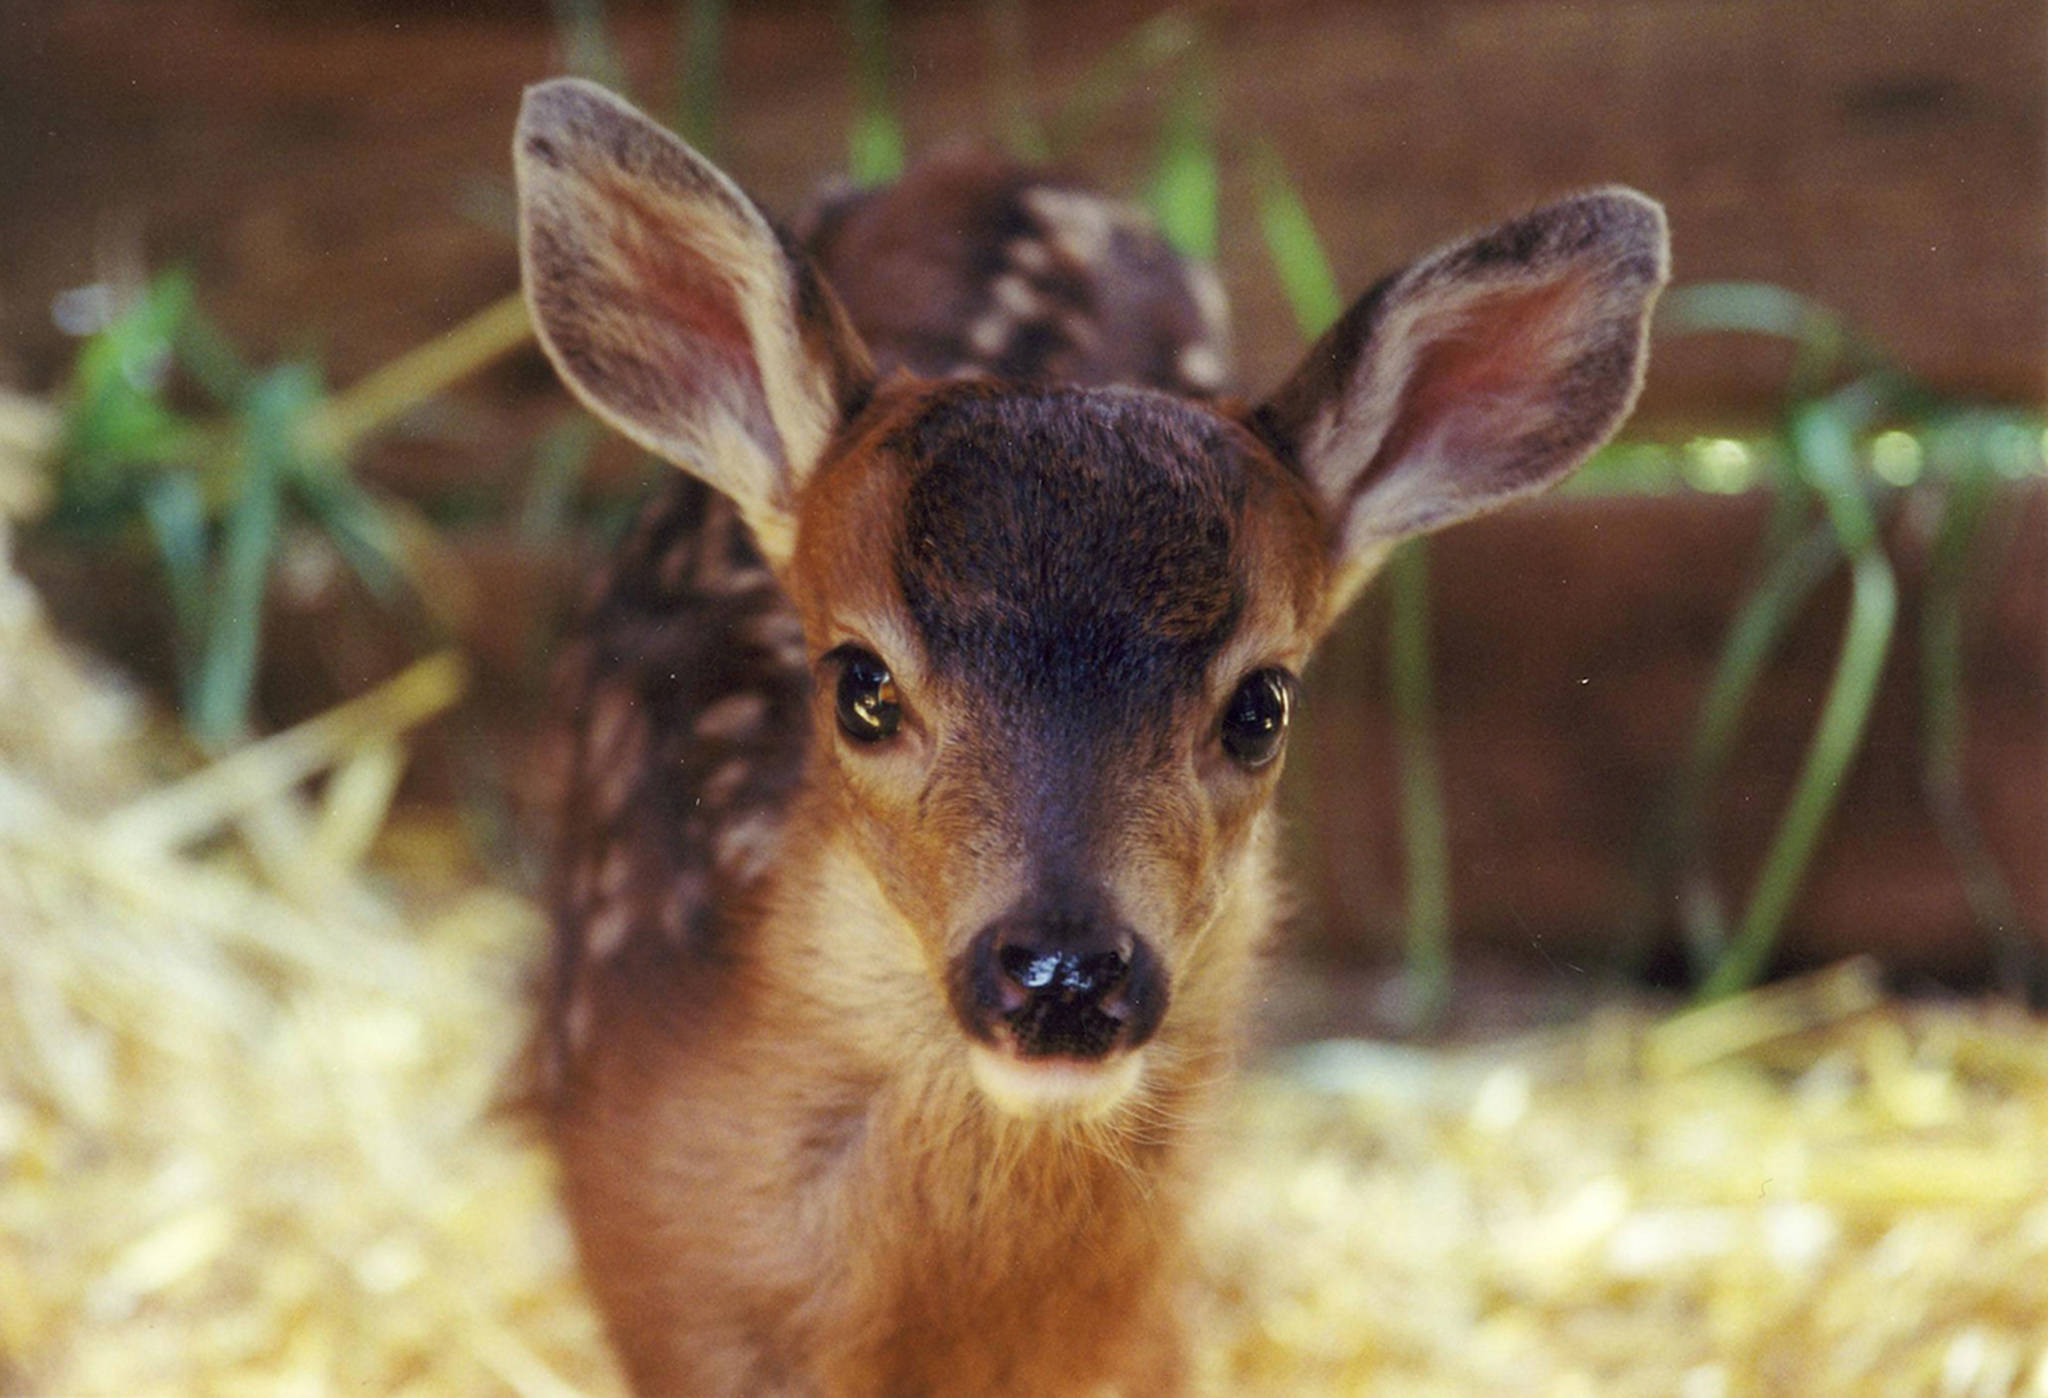 Mother deer — baby season in the San Juans welcomes fawns, fledglings and fox kits